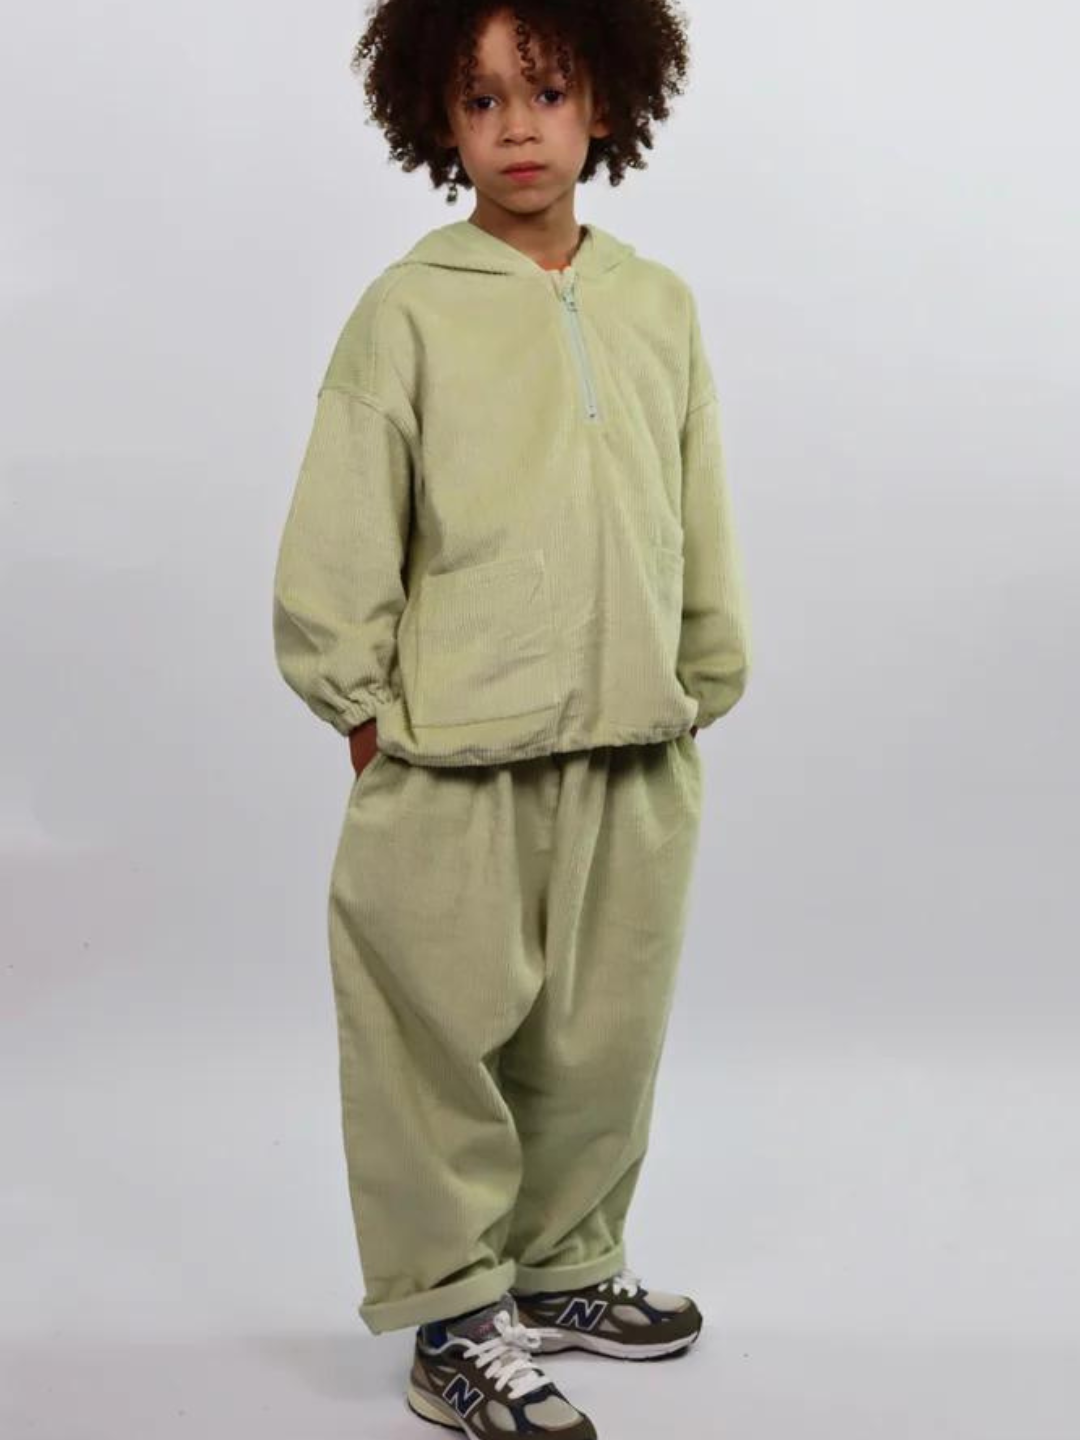 Light Pistachio | Child wearing light pistachio green kids' hooded smock and pants